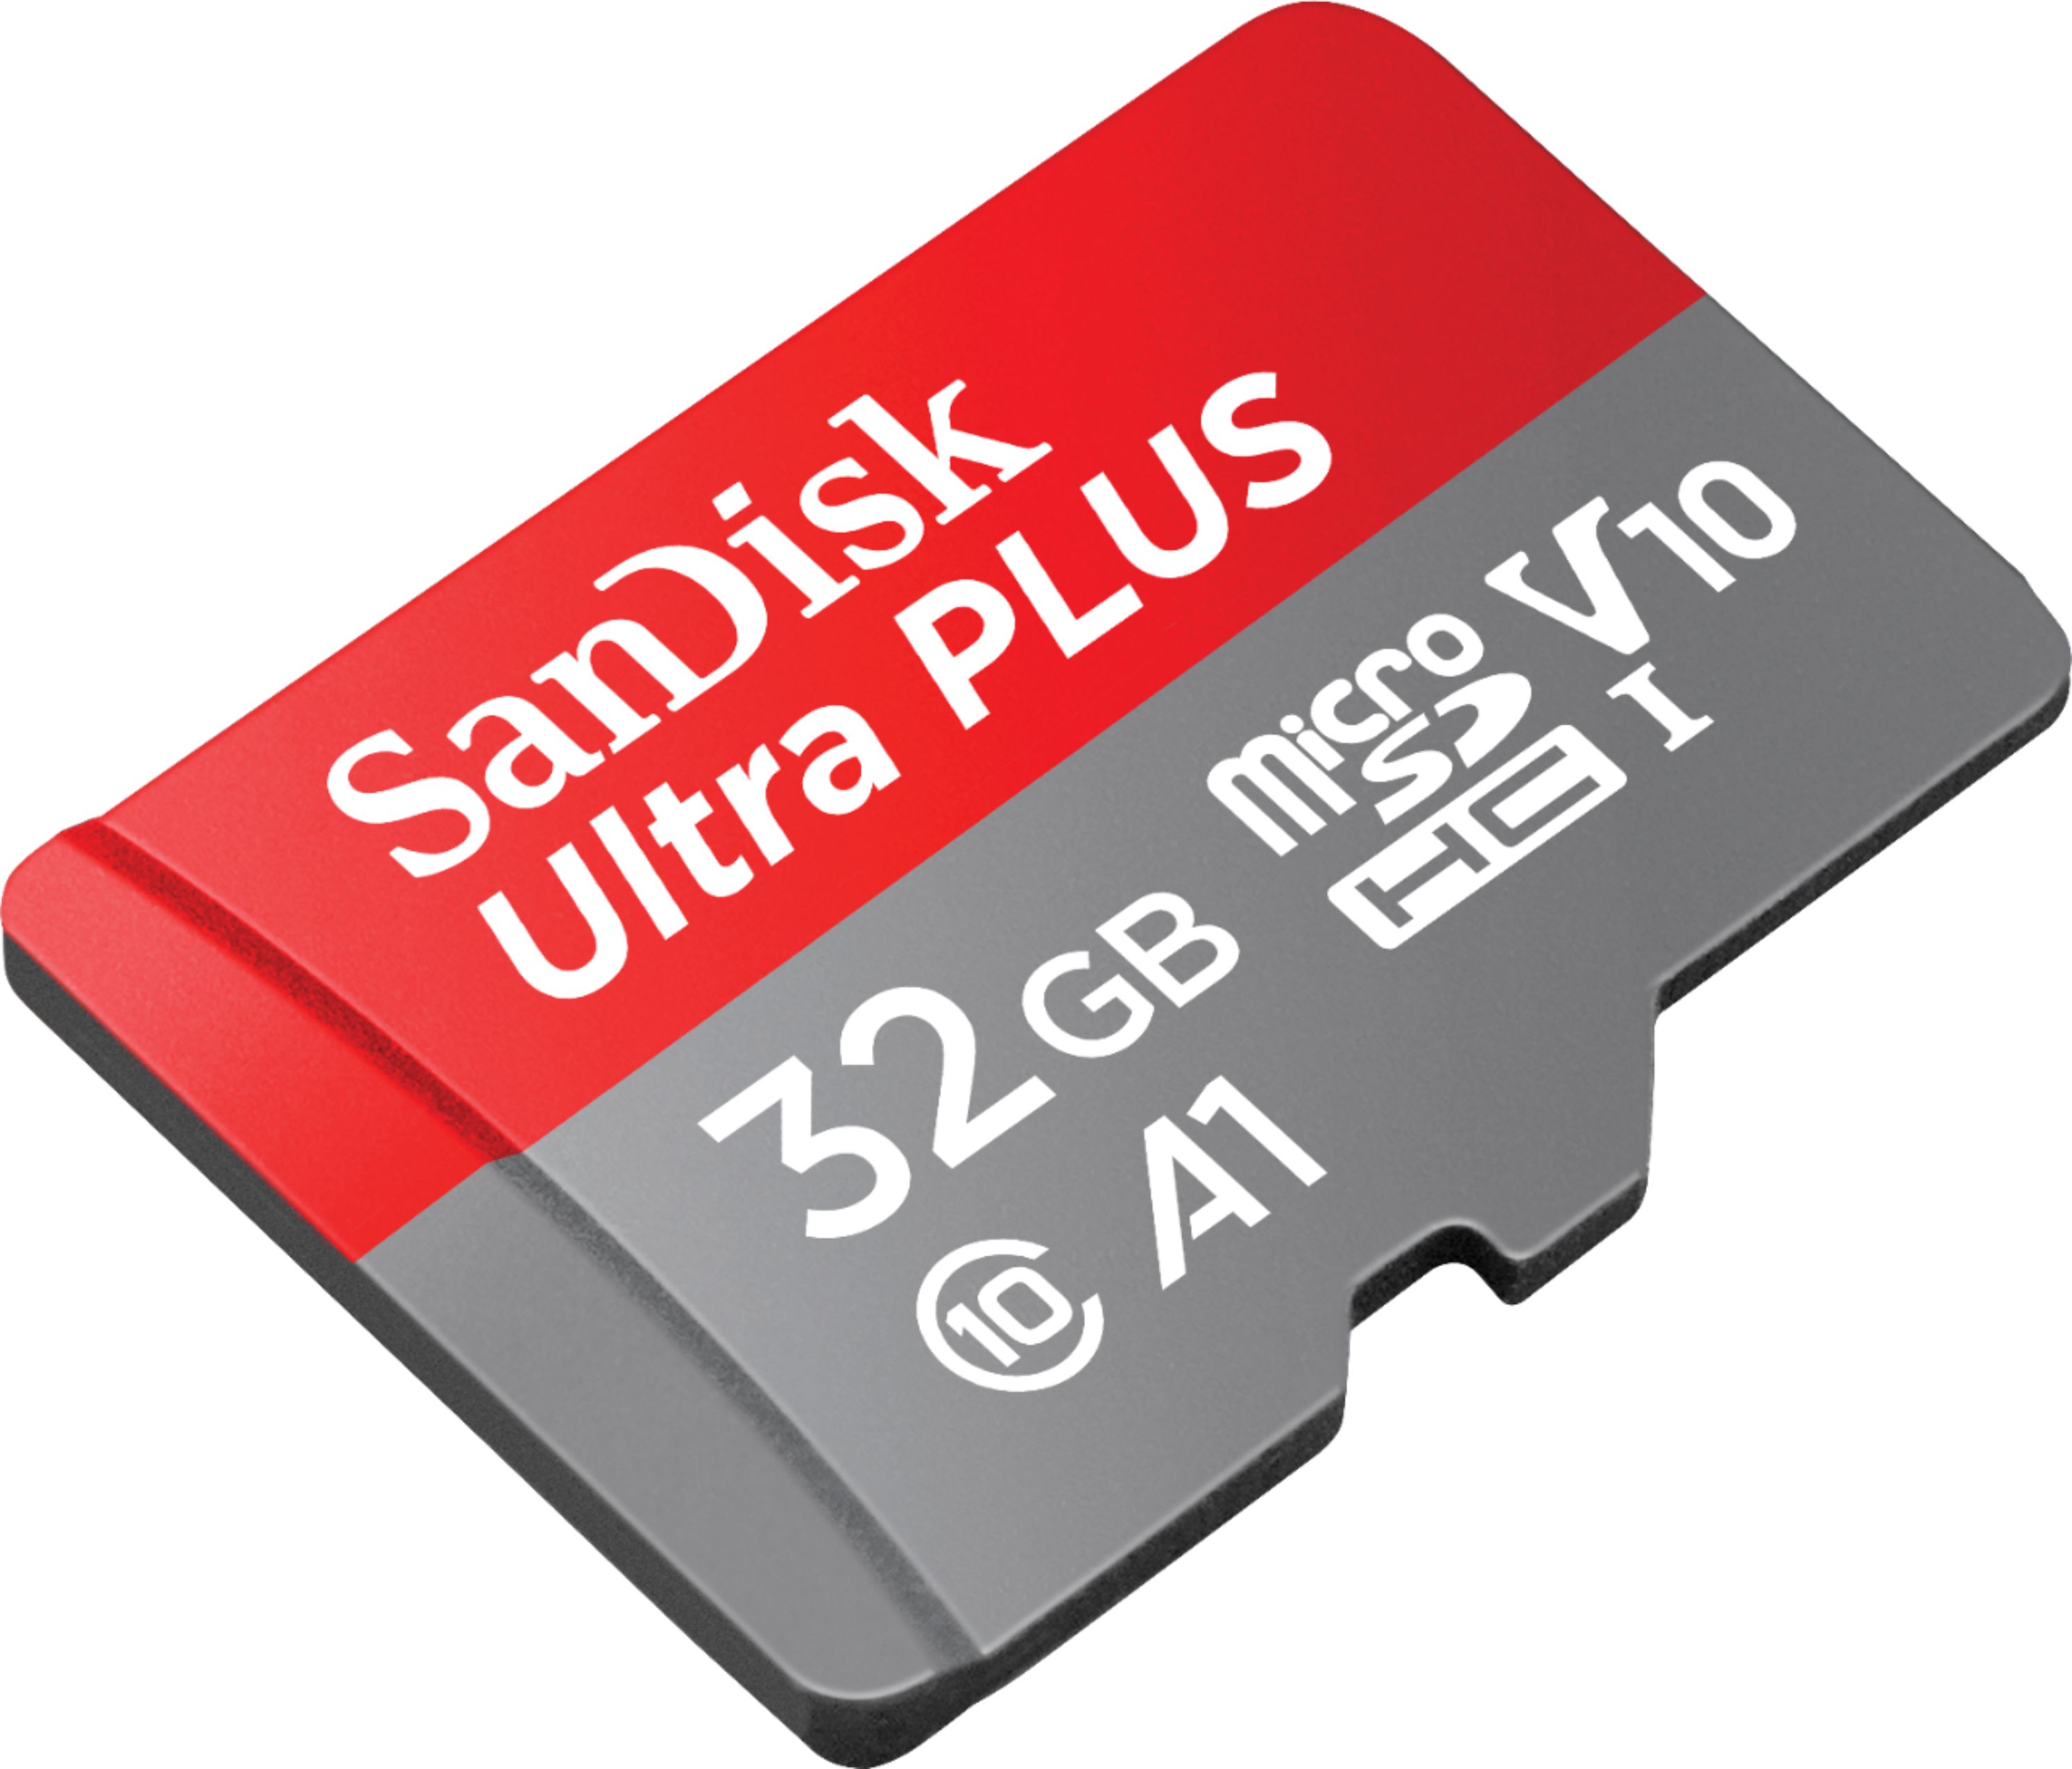 Quick Review: SanDisk Ultra PLUS 32GB microSDHC Card (SDSQUB3-032G